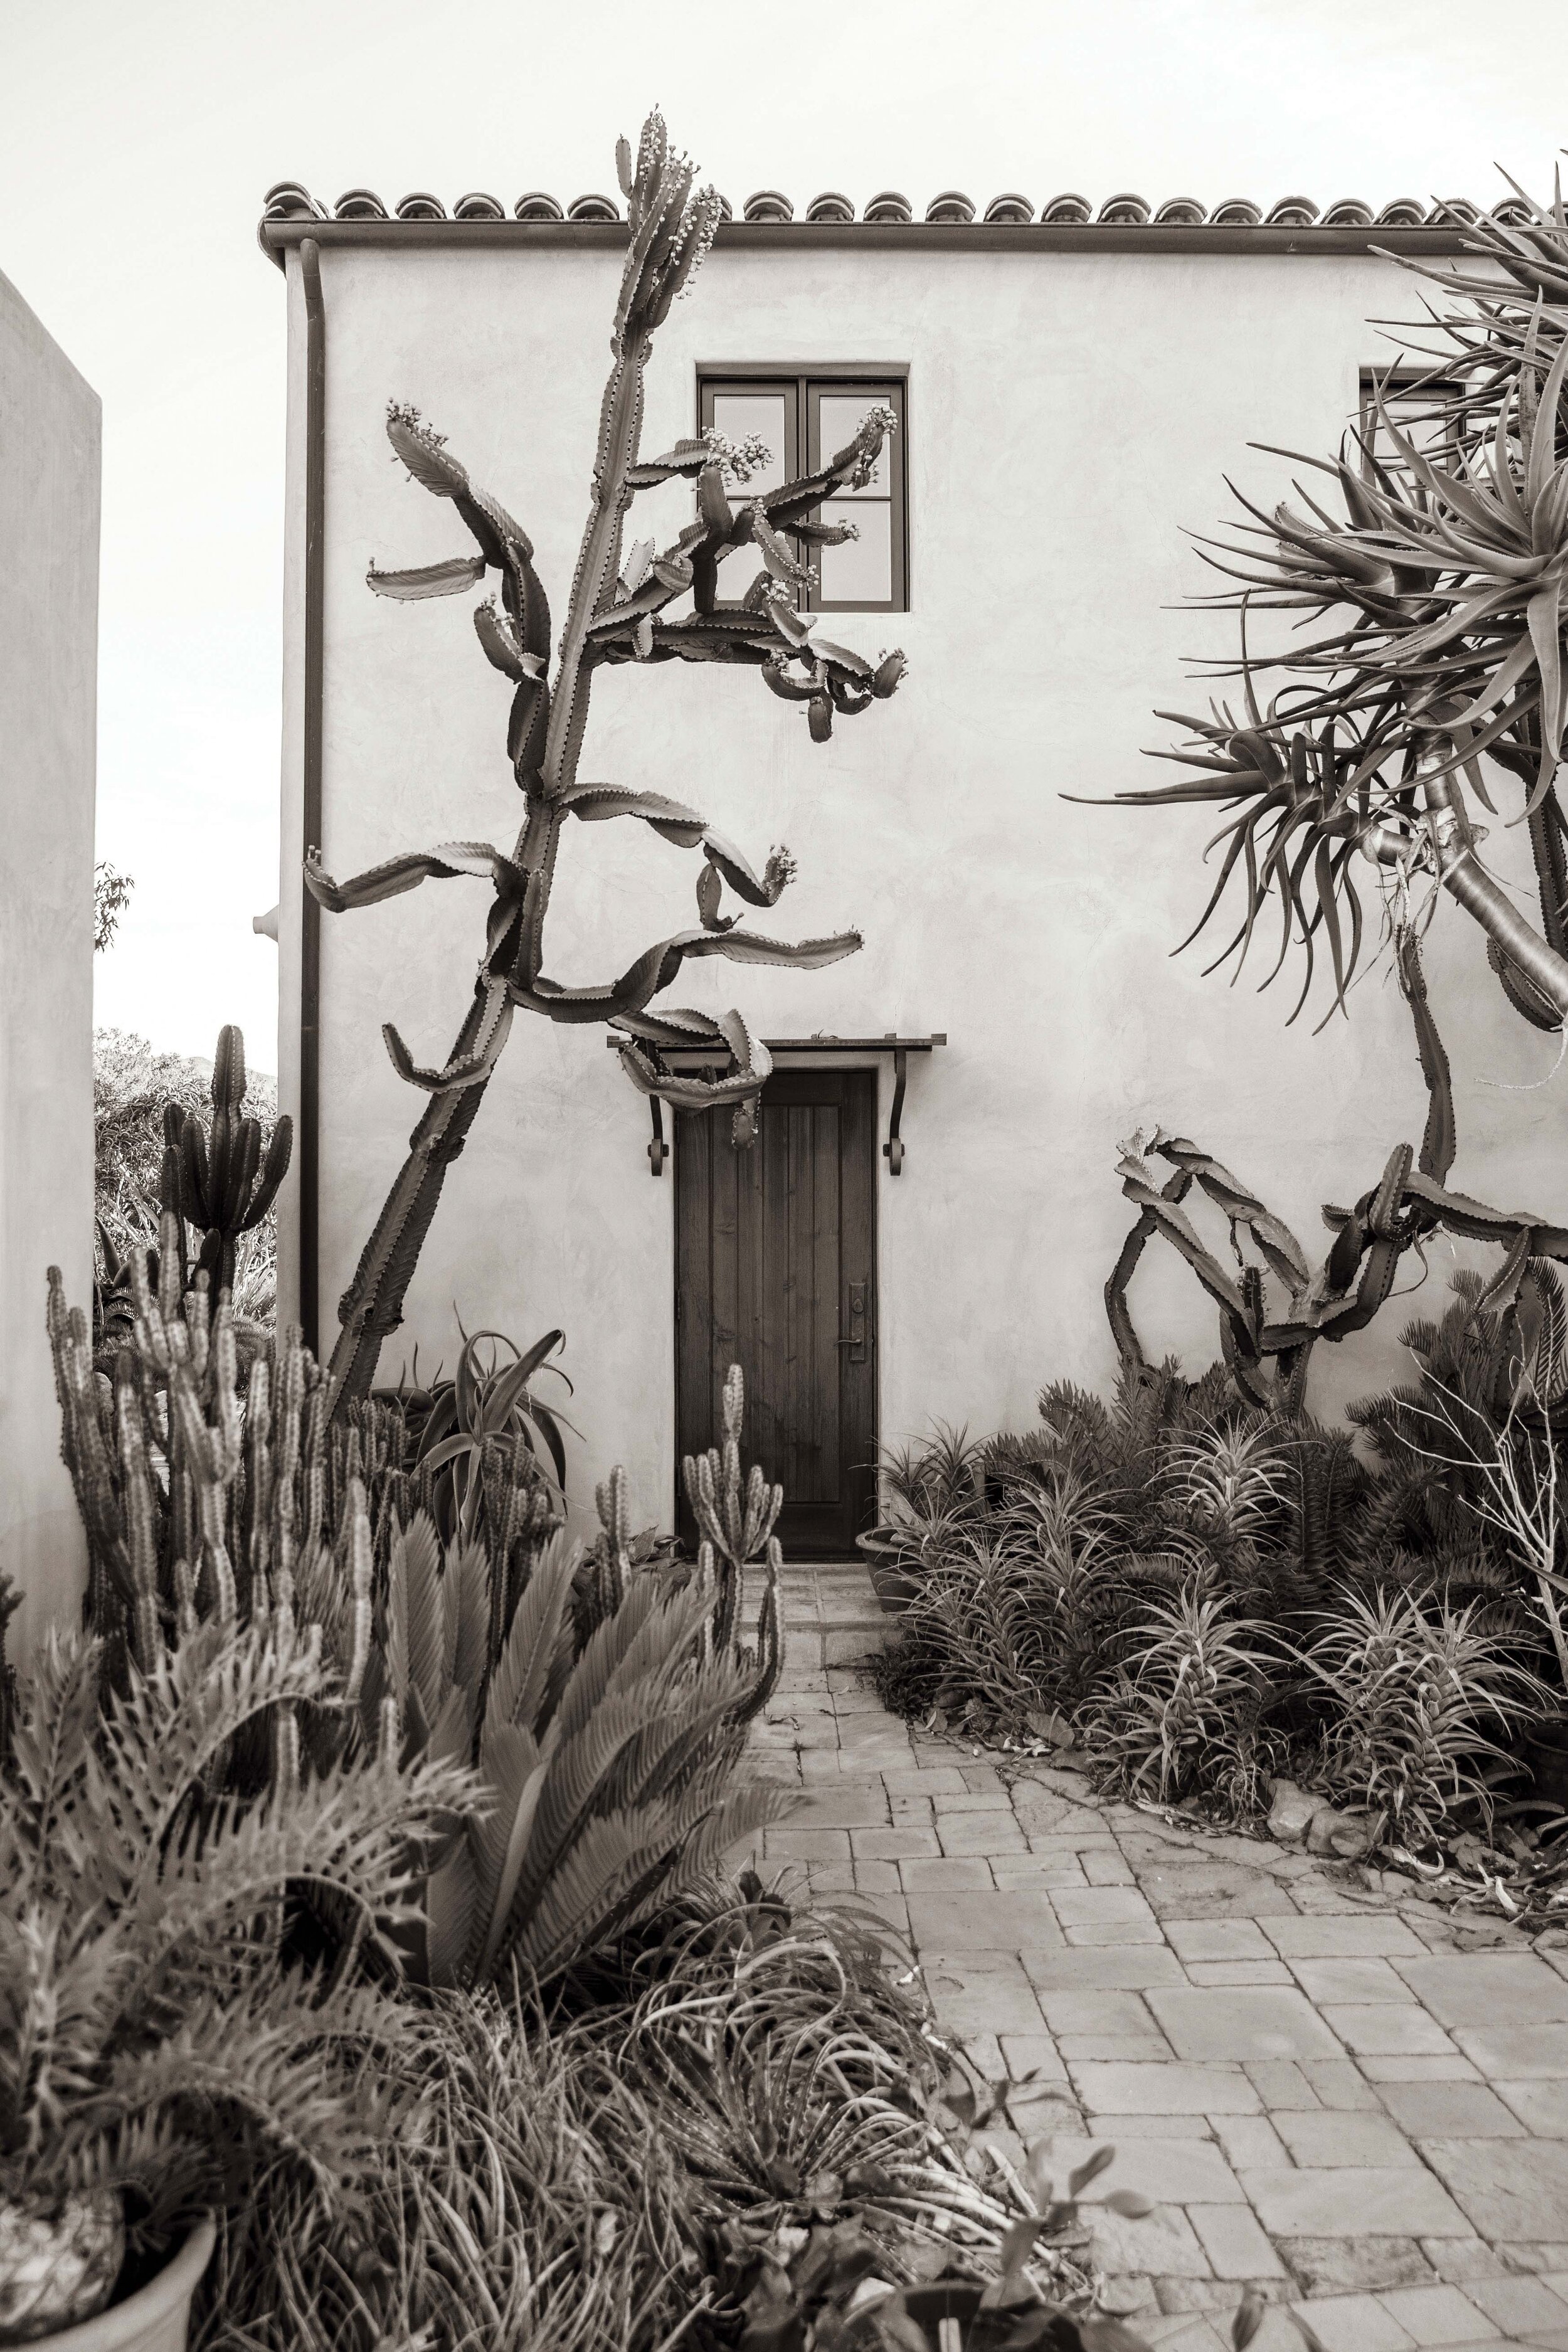  Combining artistry and architecture, succulents help frame the home. 